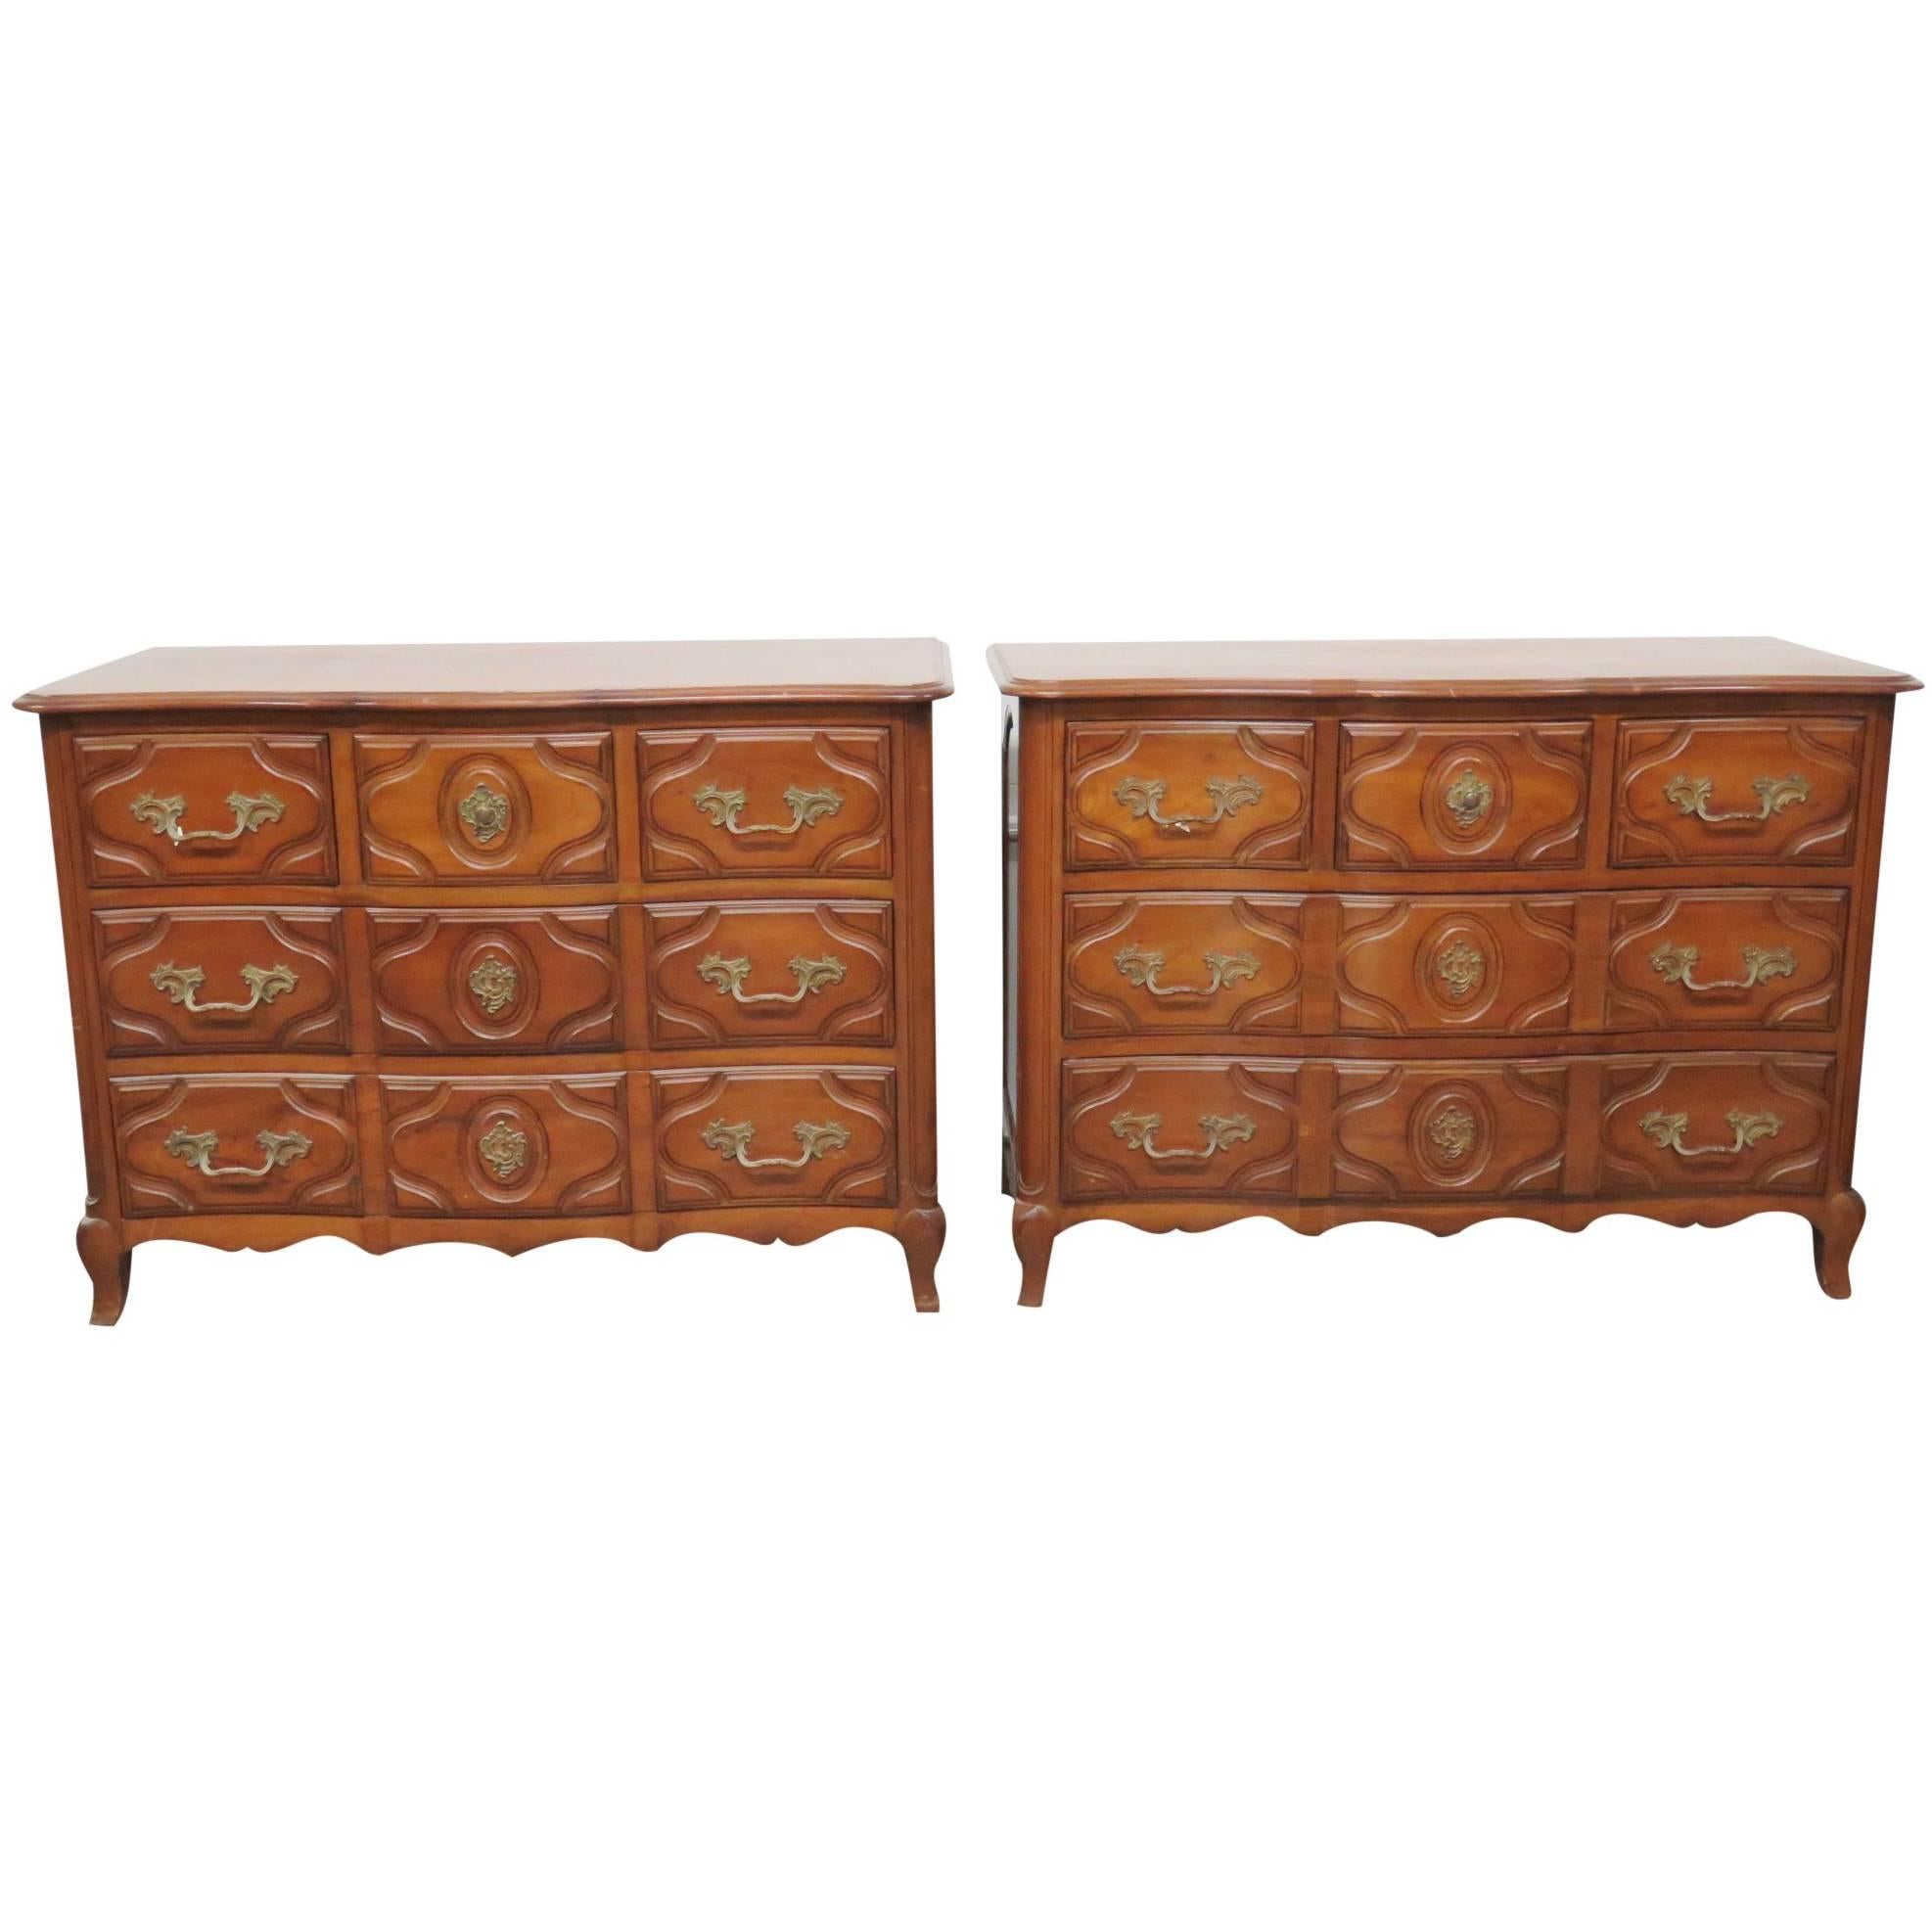 Pair of Auffray Style Carved Walnut Louis XV Commodes Dressers